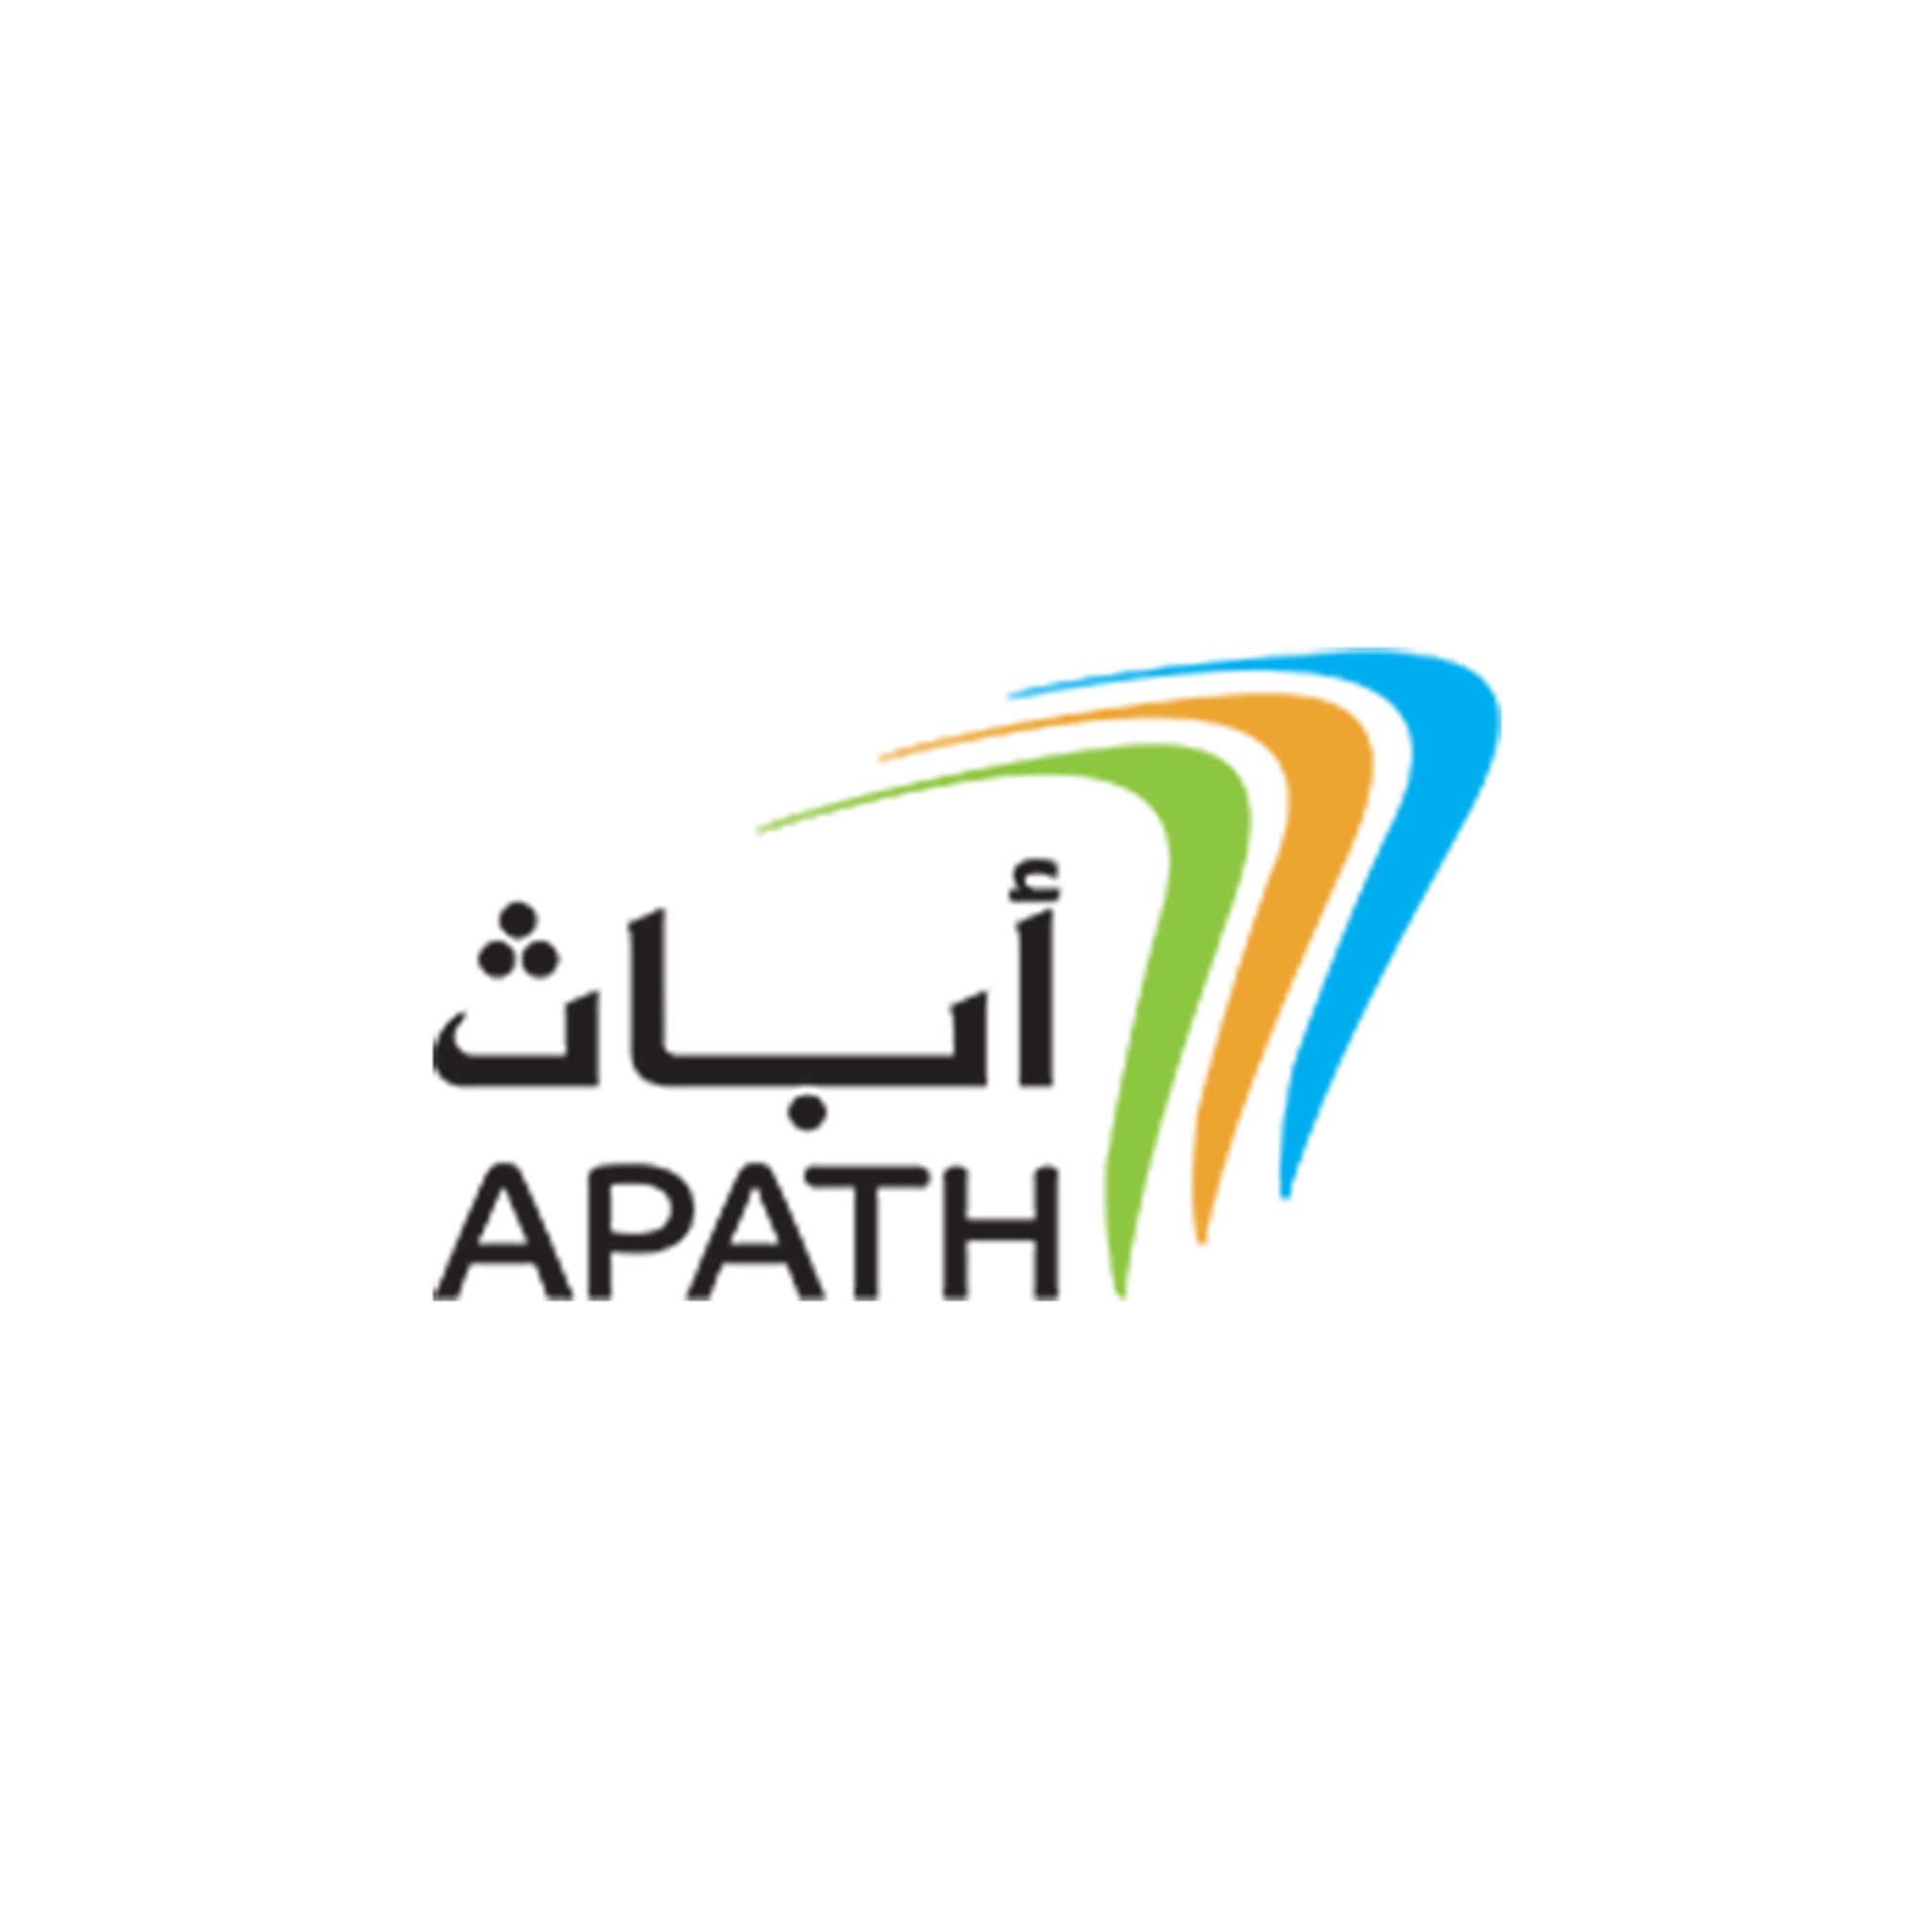 ABATH - Excellence in Engineering